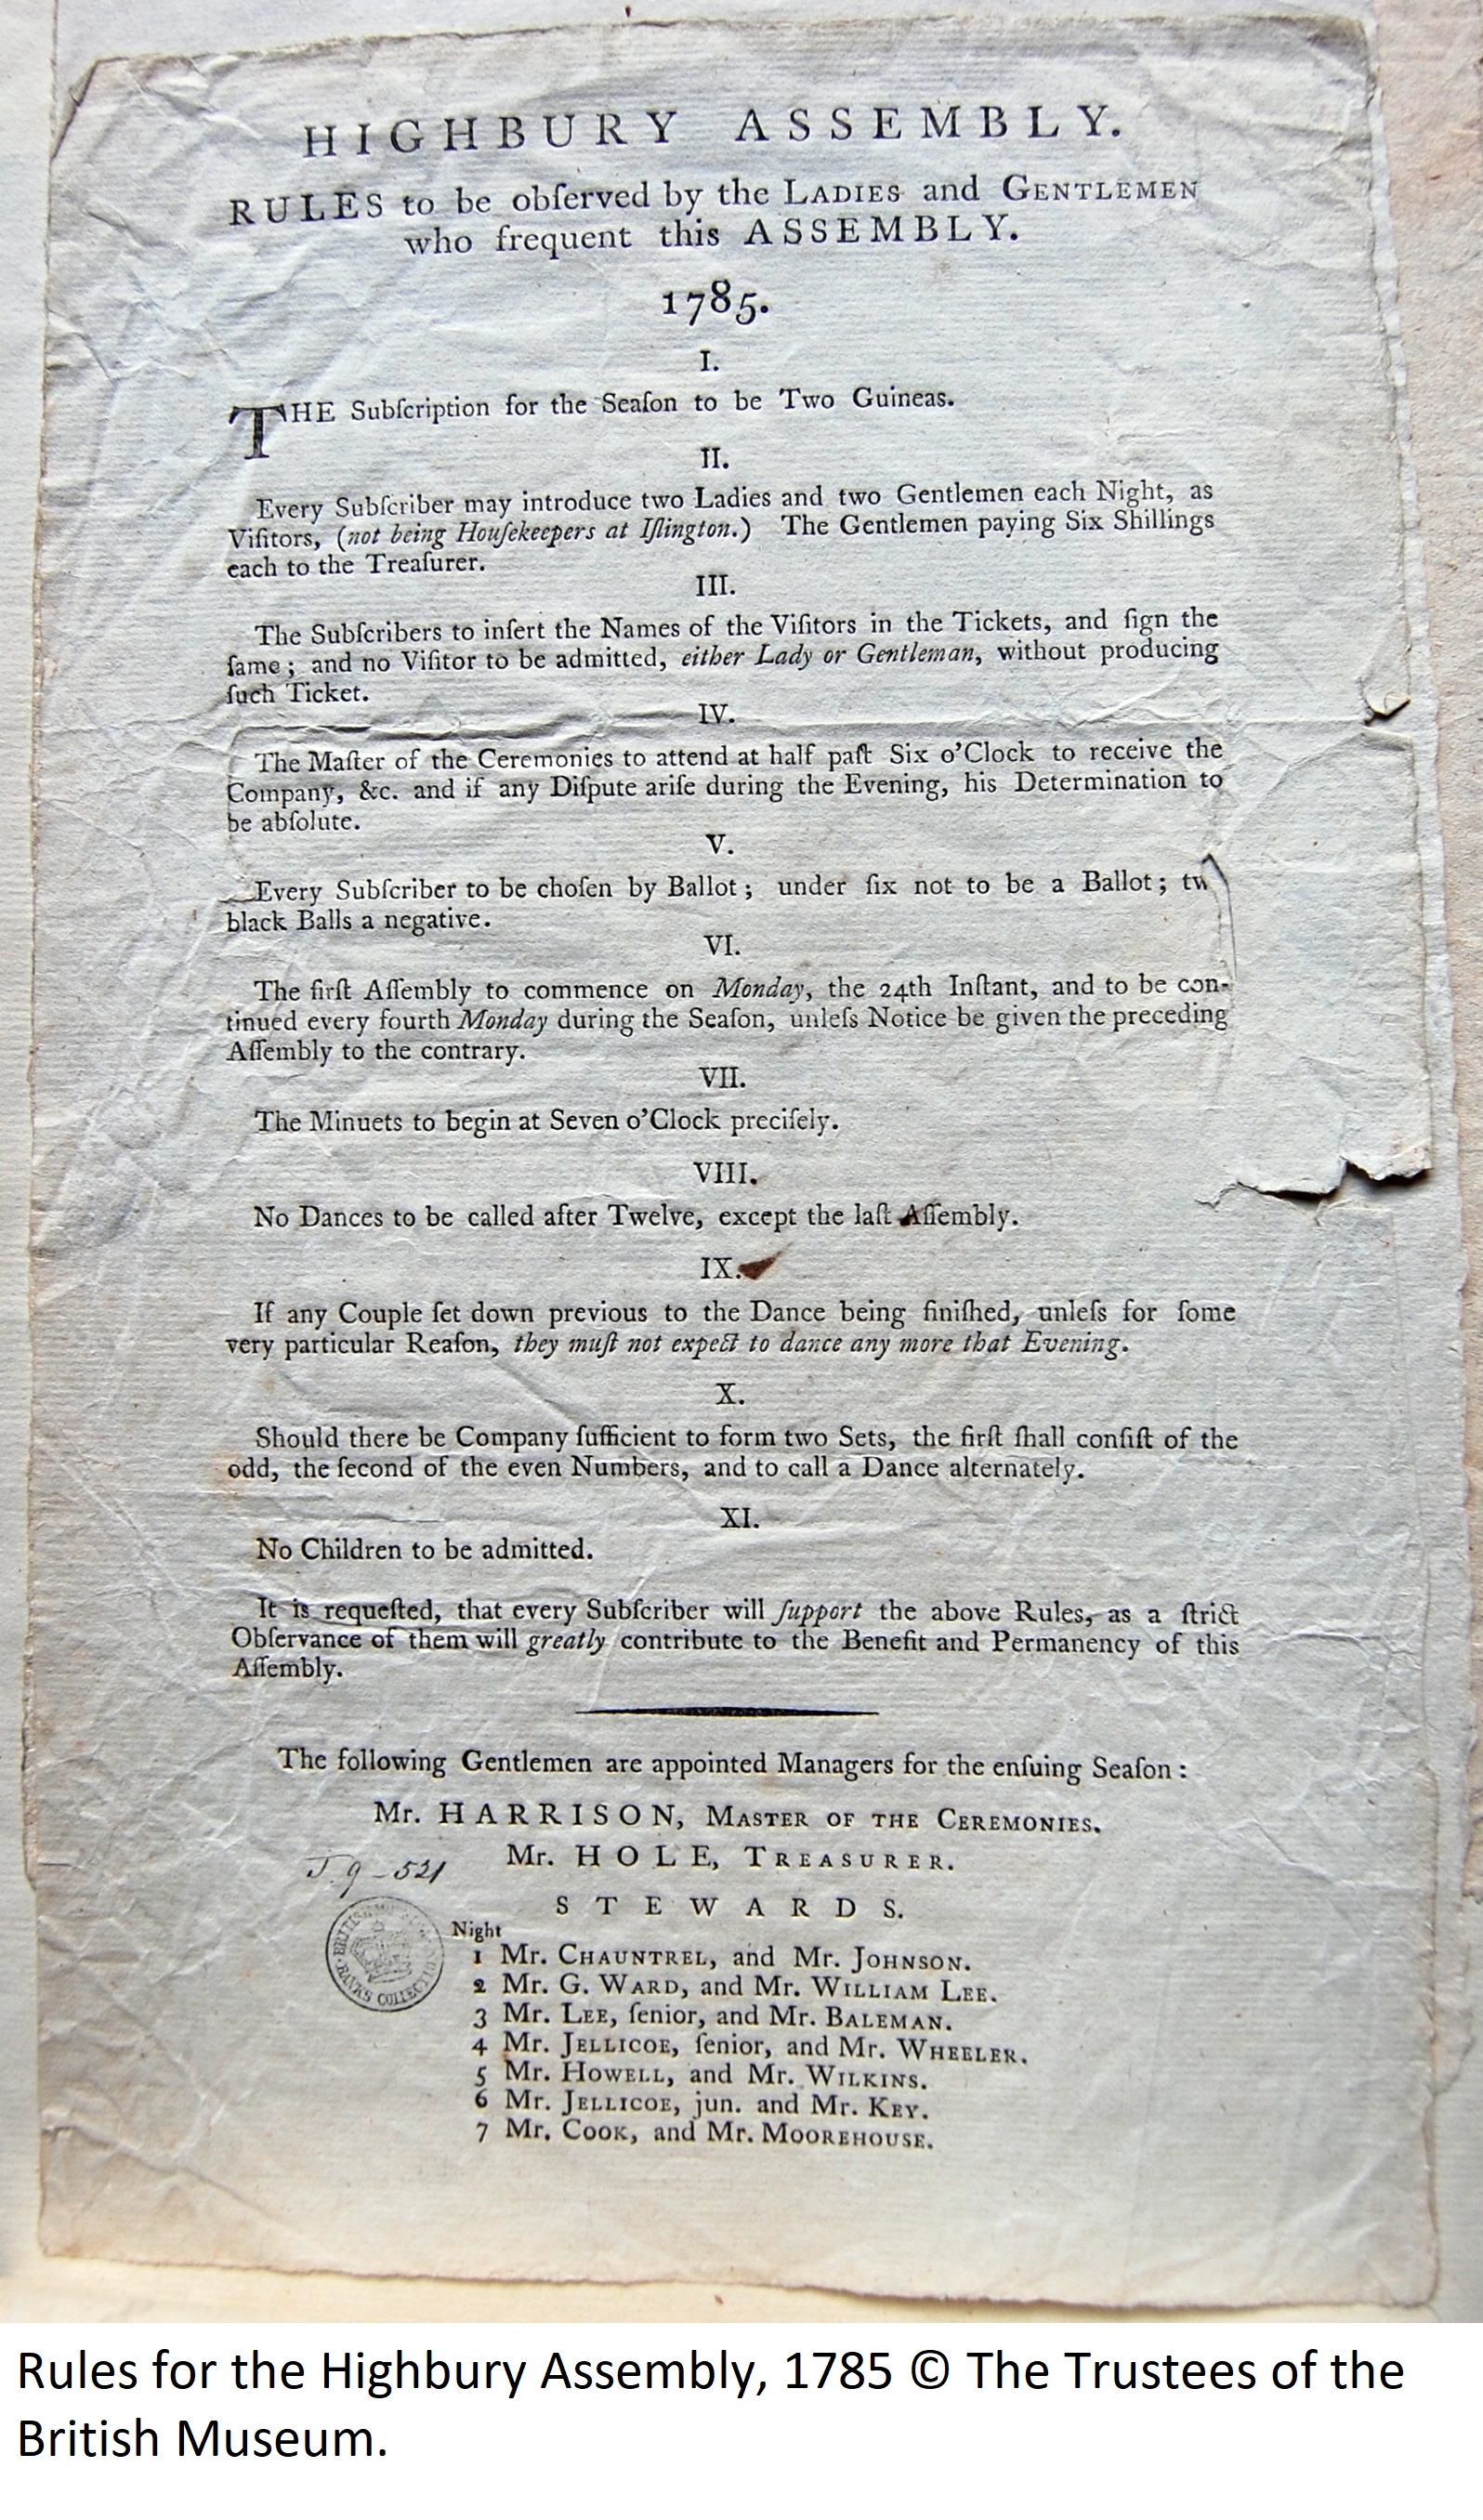 Rules for the Highbury Assembly, 1785 © The Trustees of the British Museum.